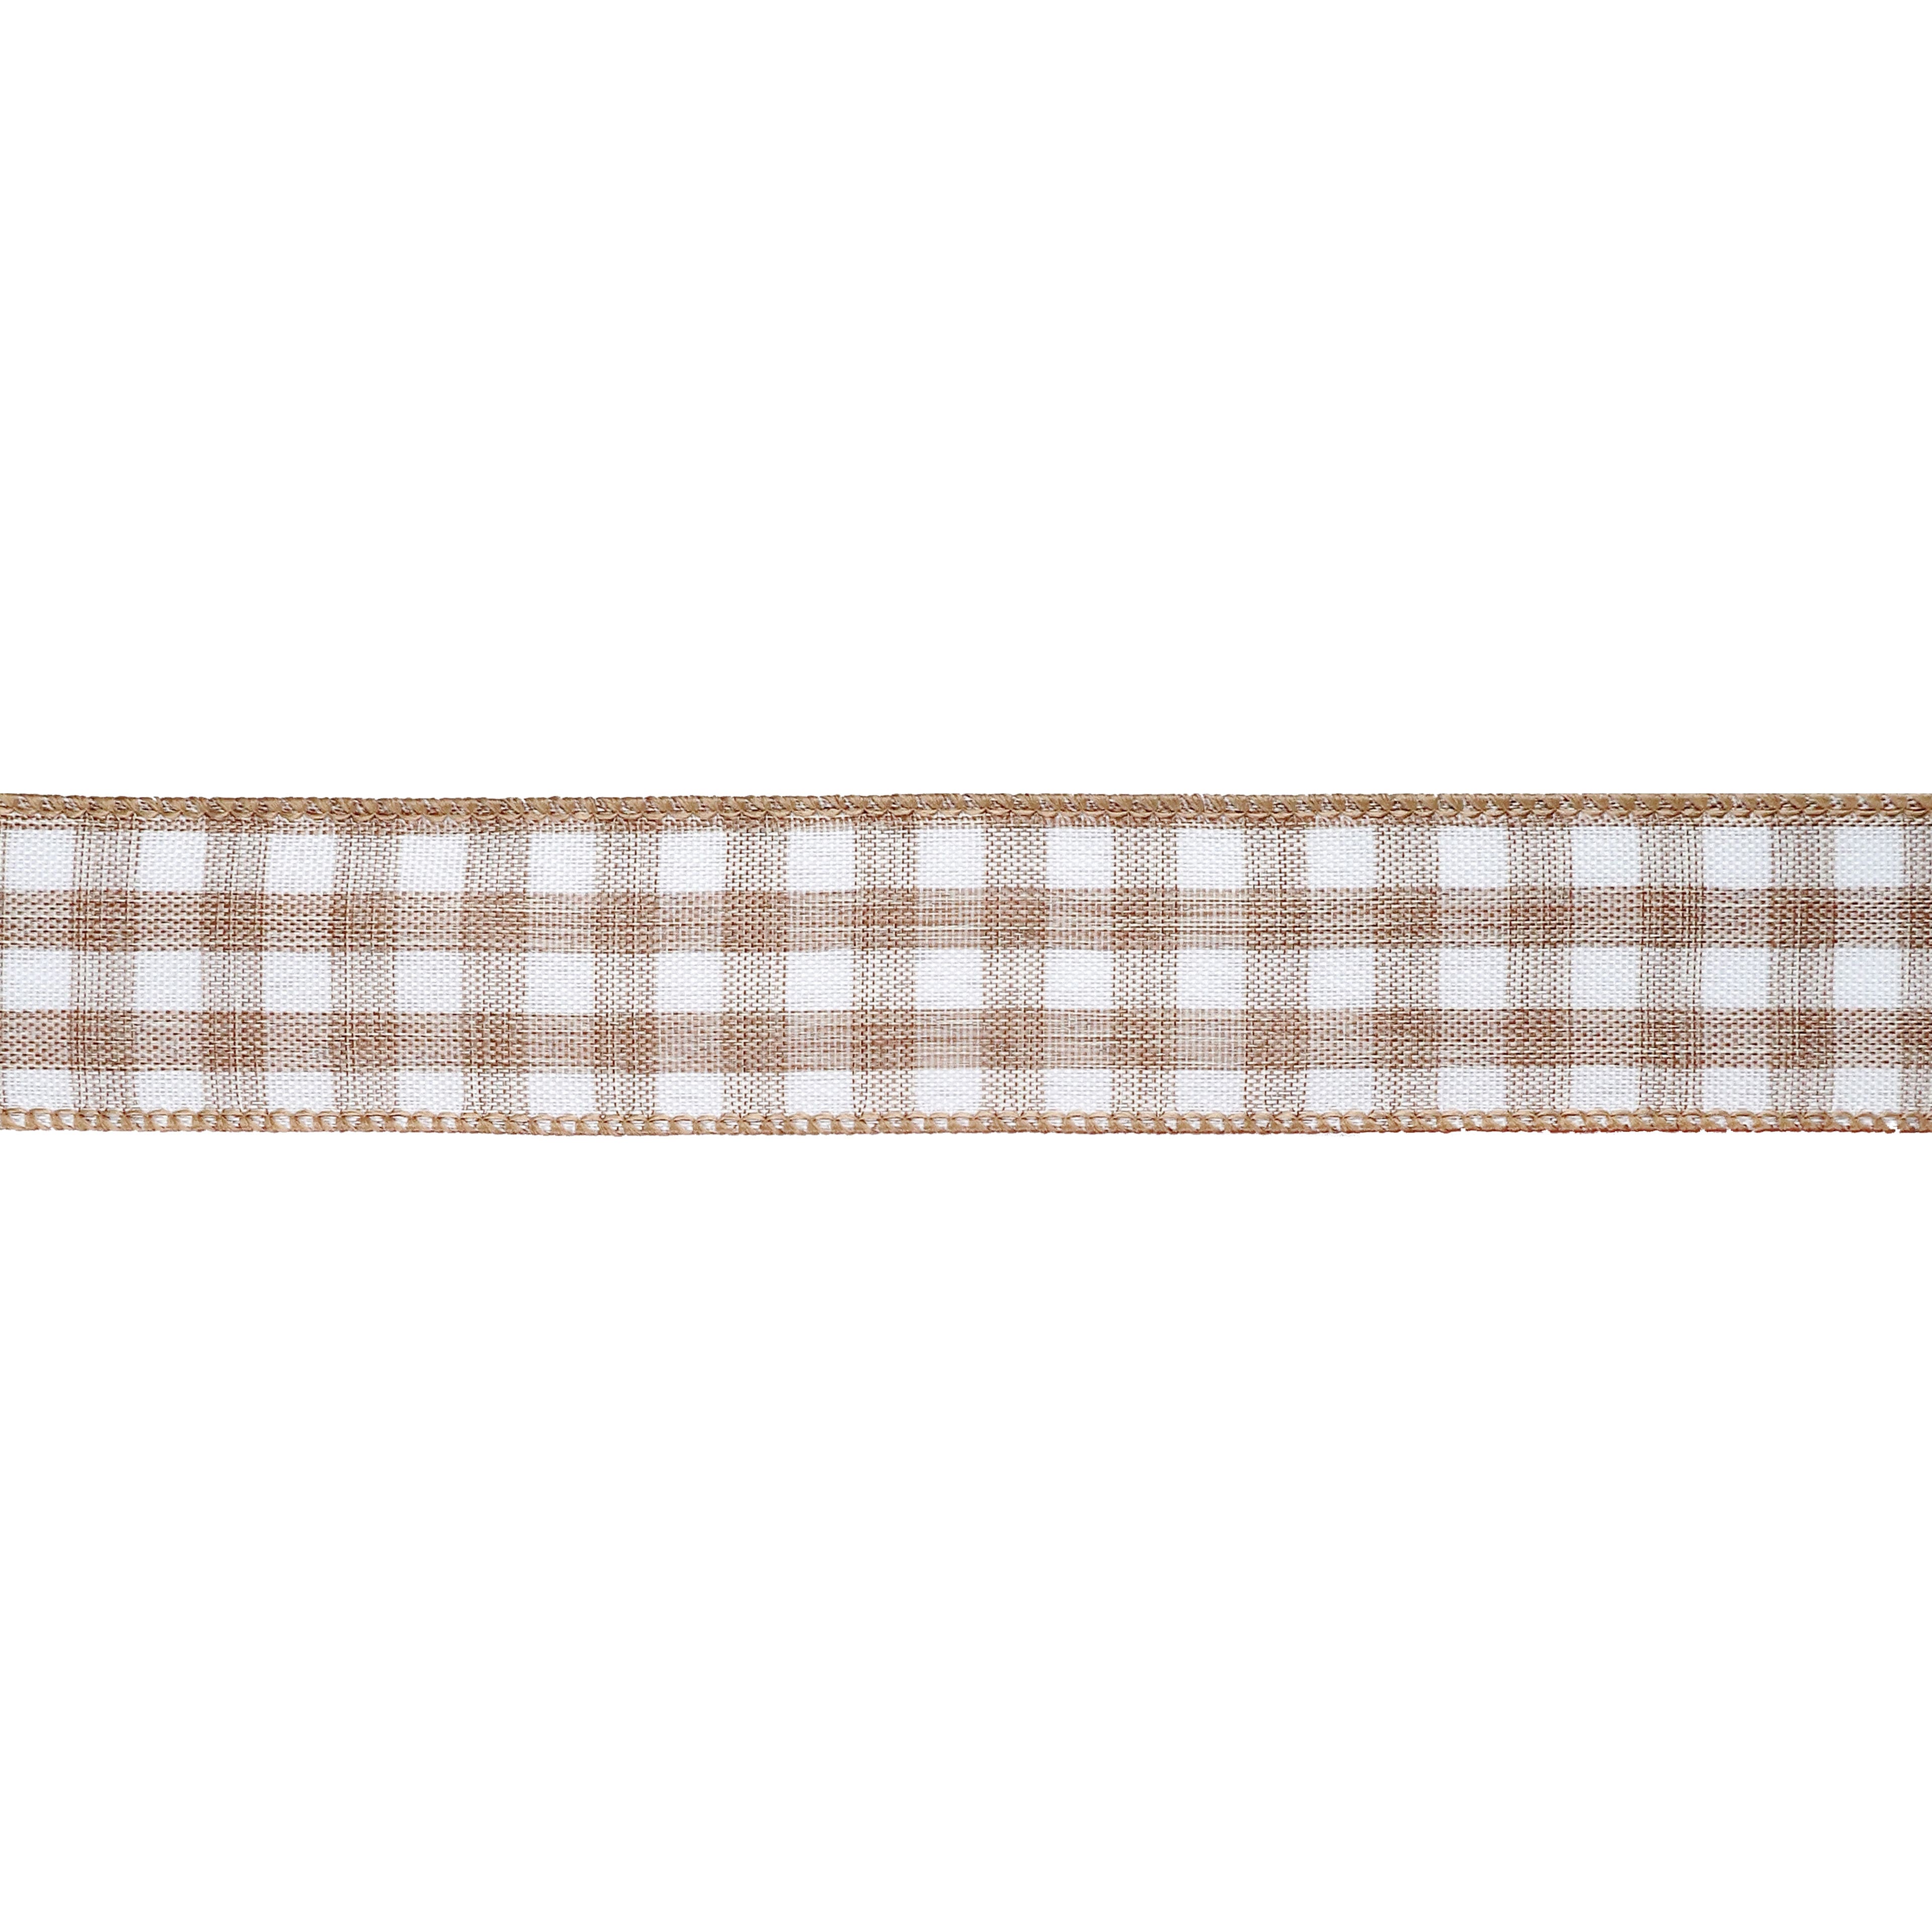 Celebrate It Wired Gingham Ribbon - 3 yd